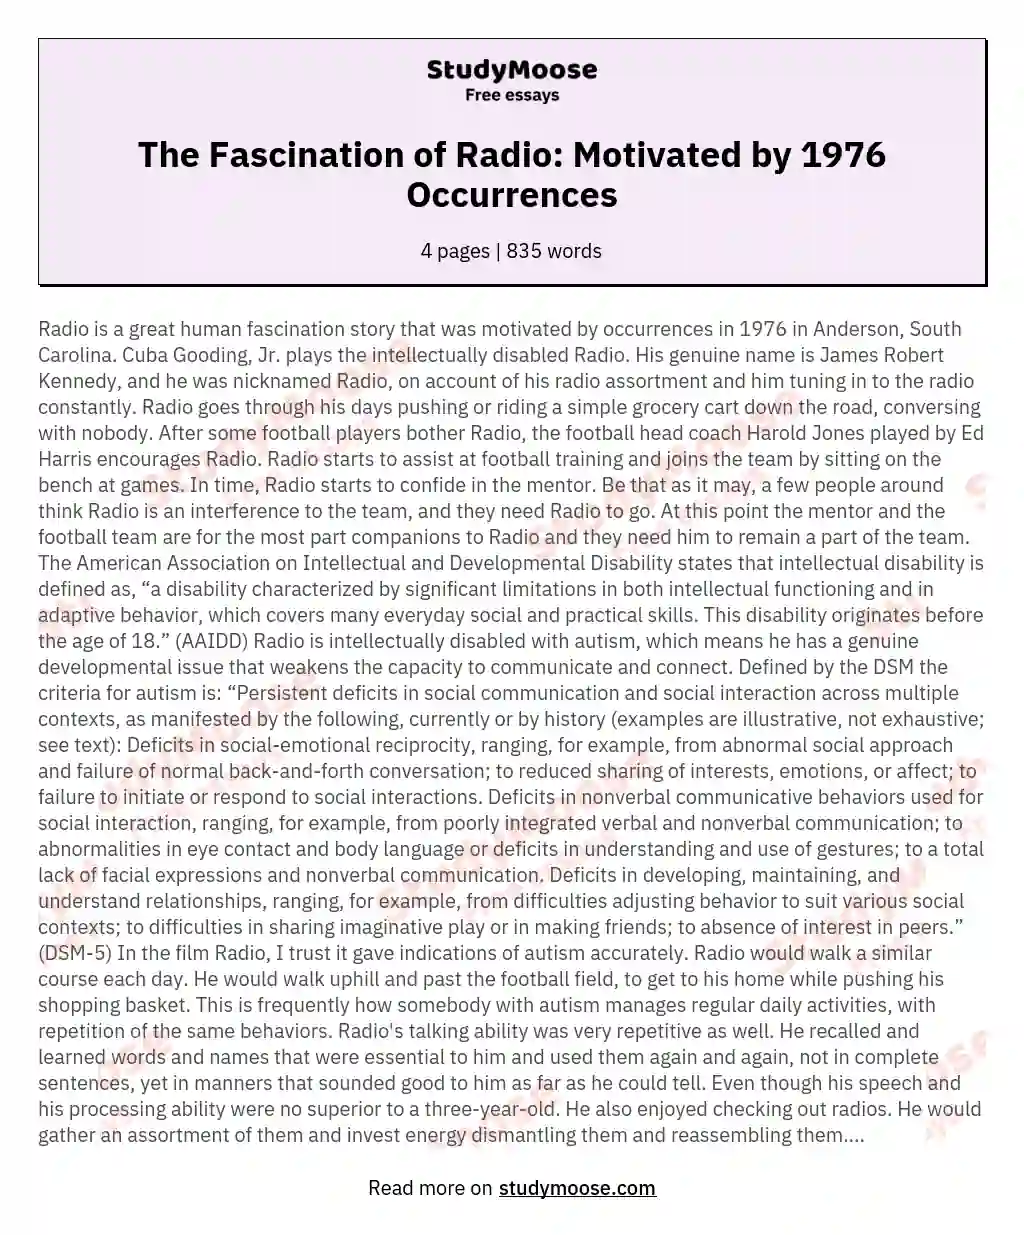 The Fascination of Radio: Motivated by 1976 Occurrences essay